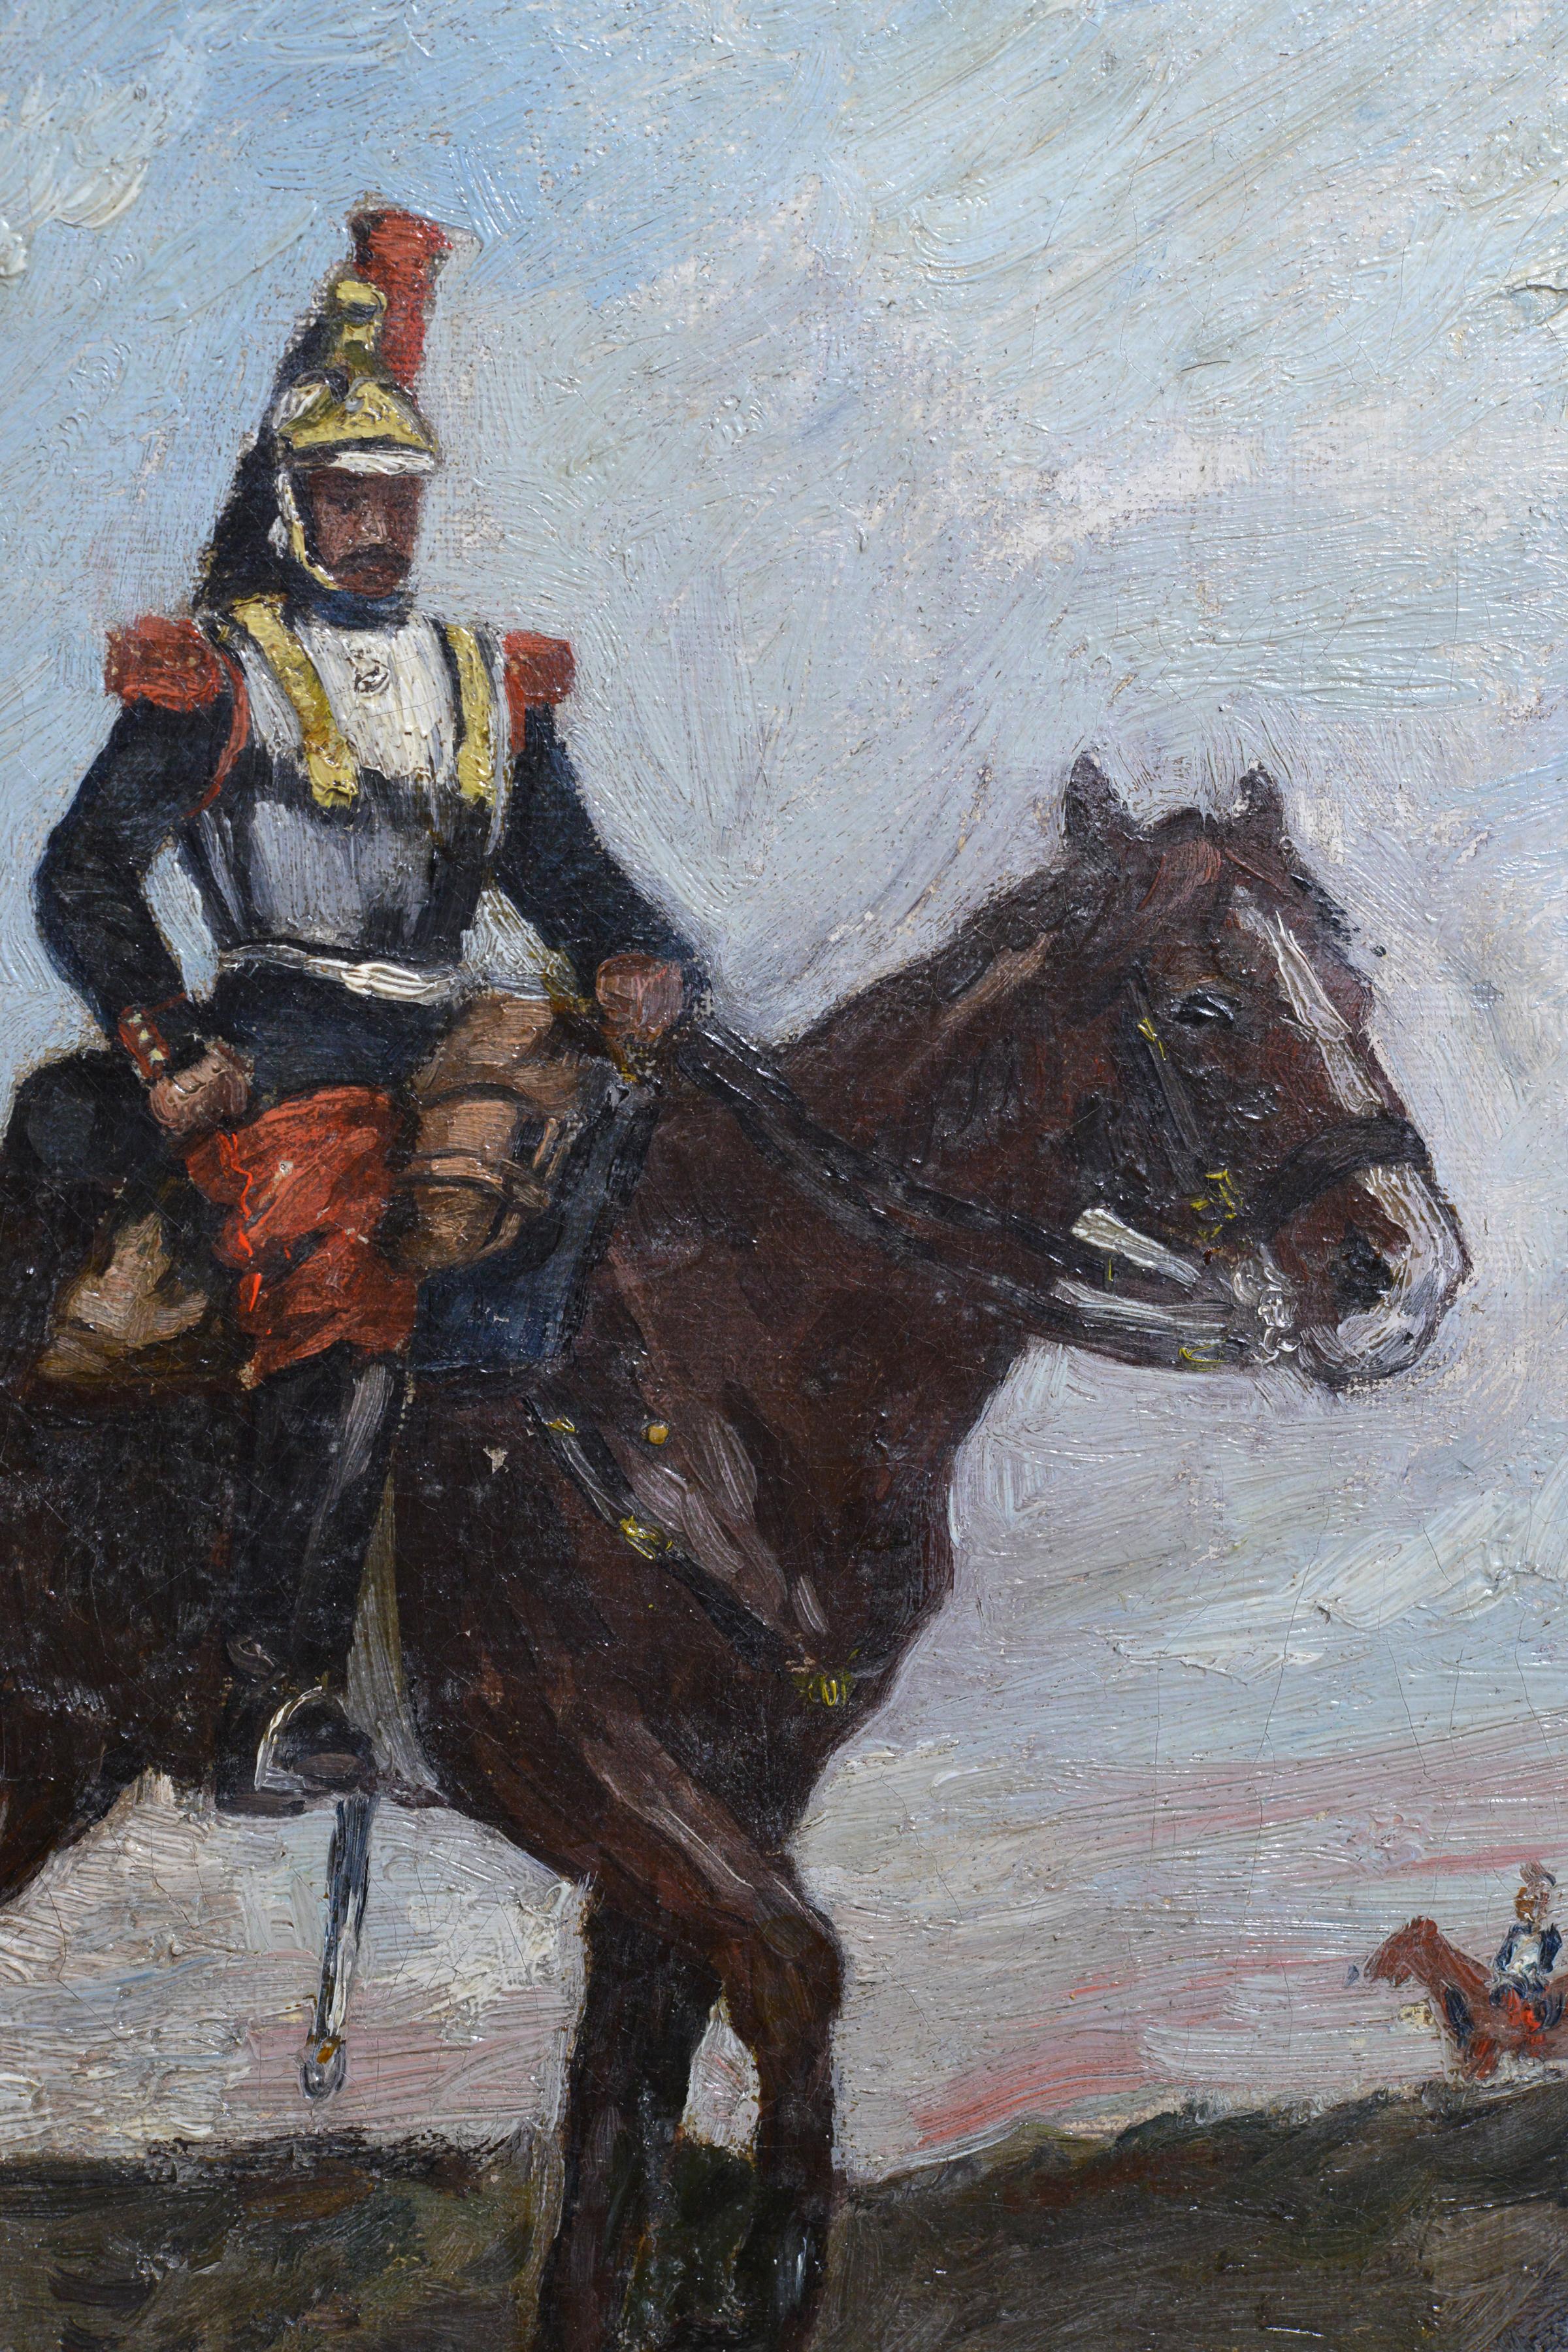 The painting depicts a French cuirassier in full combat gear on a mounted patrol, peering into the distance... The powerful physique of the rider and his horse inspires awe and fear among enemies. The artist probably drew inspiration for the